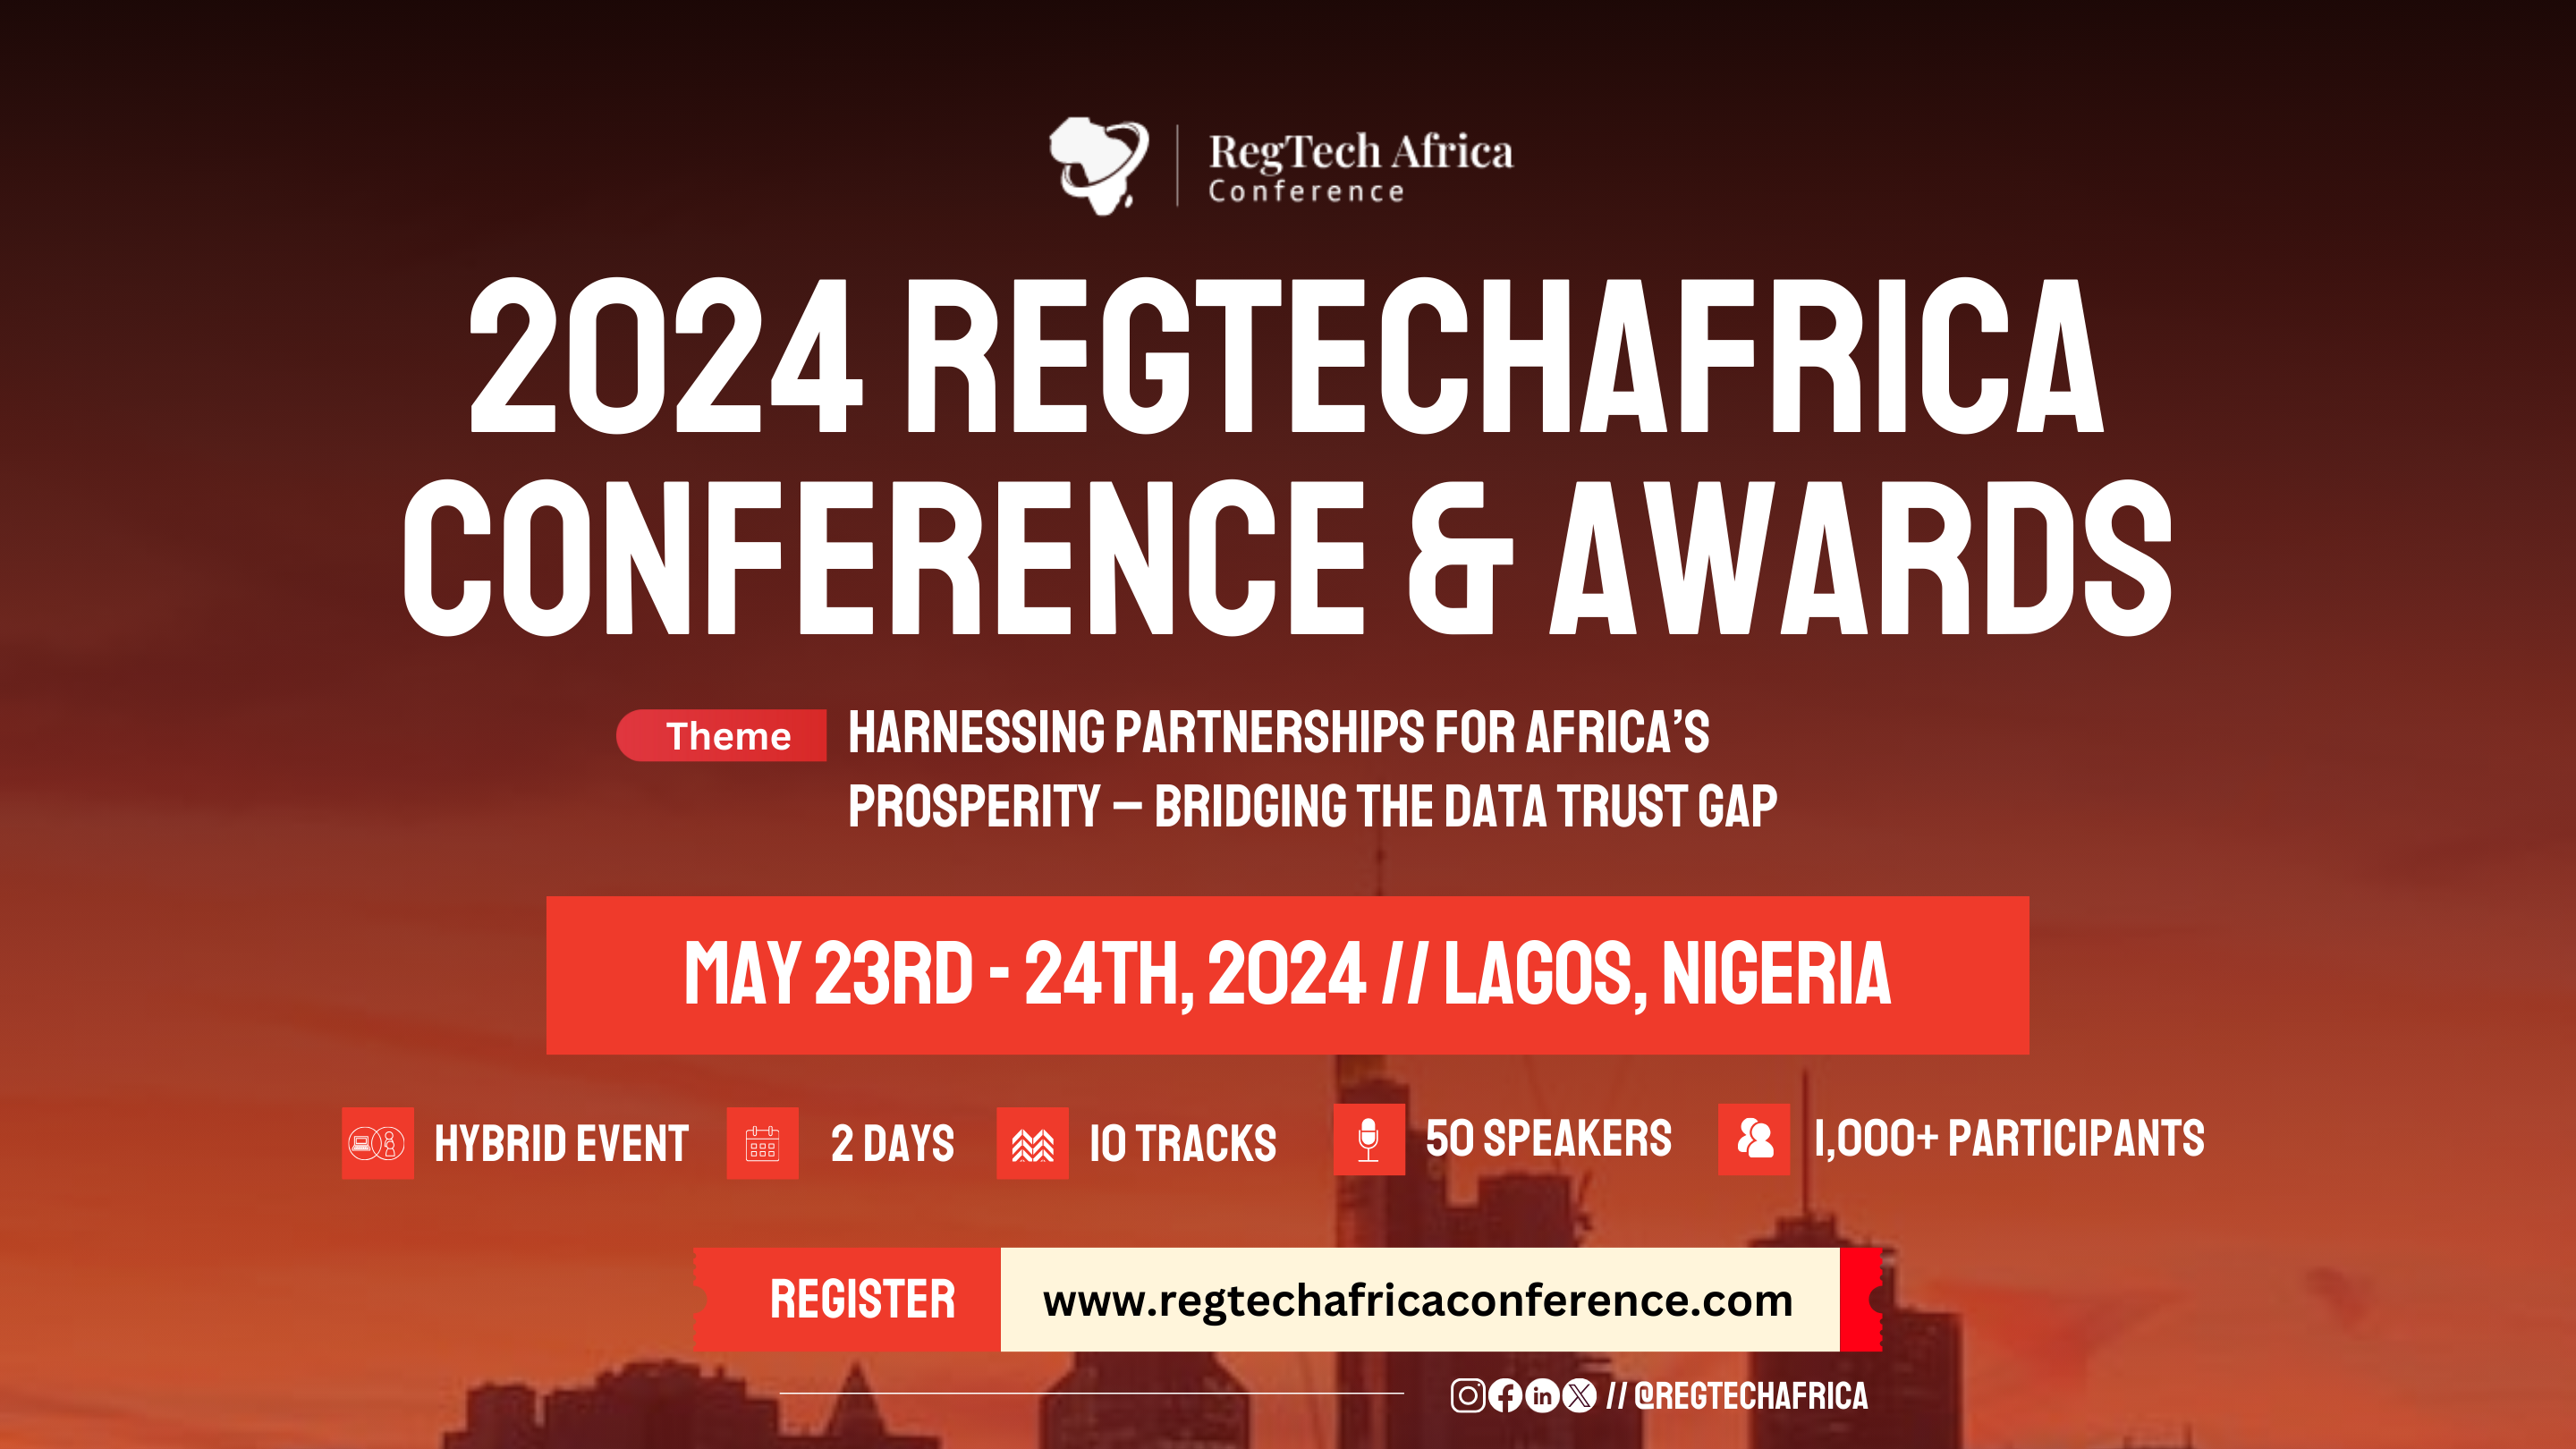 RegTech Africa’s May 2024 Conference to address Africa’s data trust issues